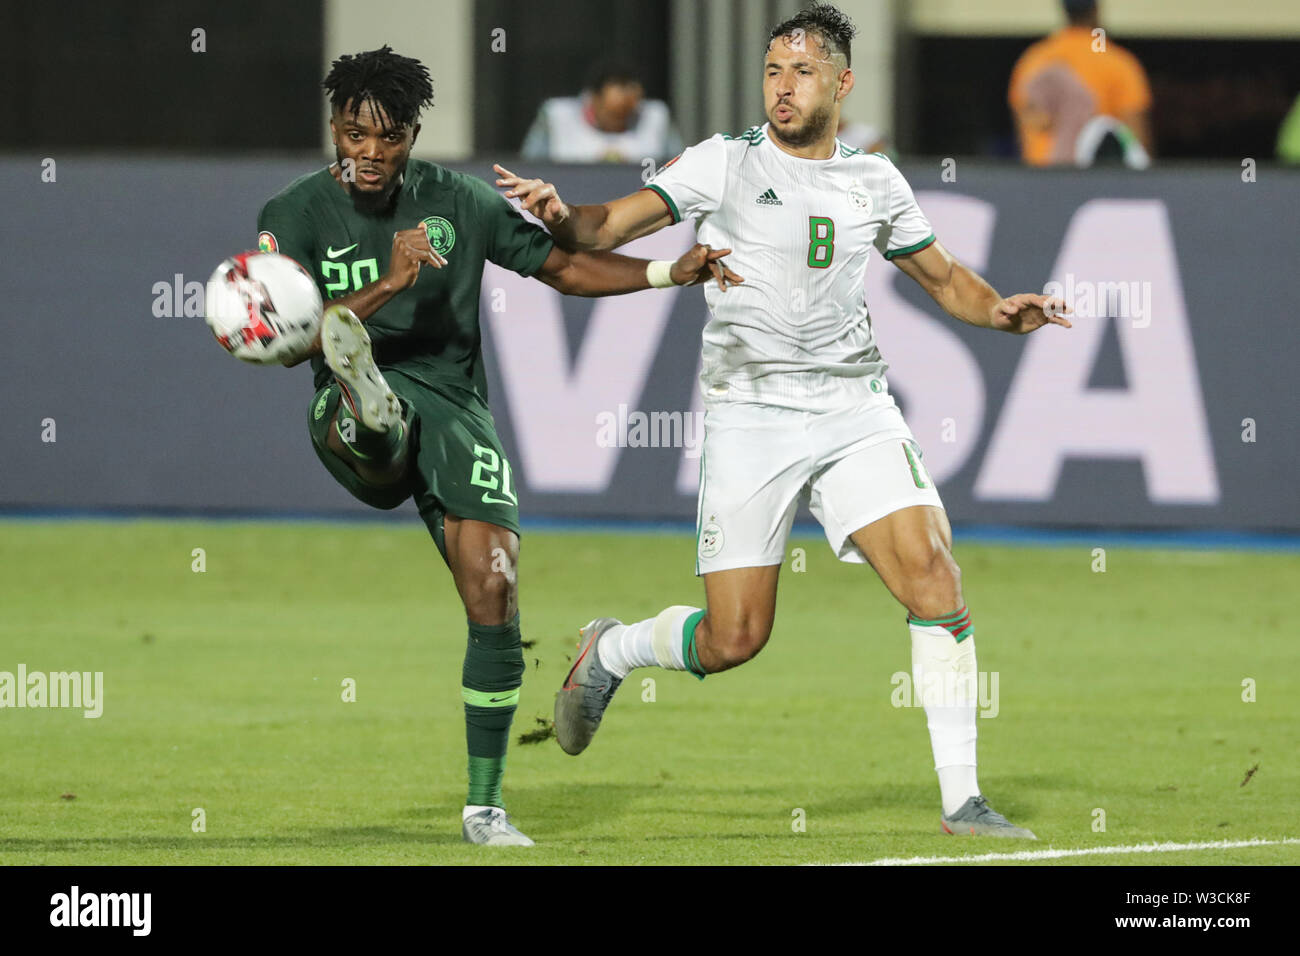 Cairo, Egypt. 14th July, 2019. Nigeria's Chidozie Awaziem (L) and Algeria's Youcef Belaili during the 2019 Africa Cup of Nations semi-final soccer match between Algeria and Nigeria at the Cairo International Stadium. Credit: Oliver Weiken/dpa/Alamy Live News Stock Photo